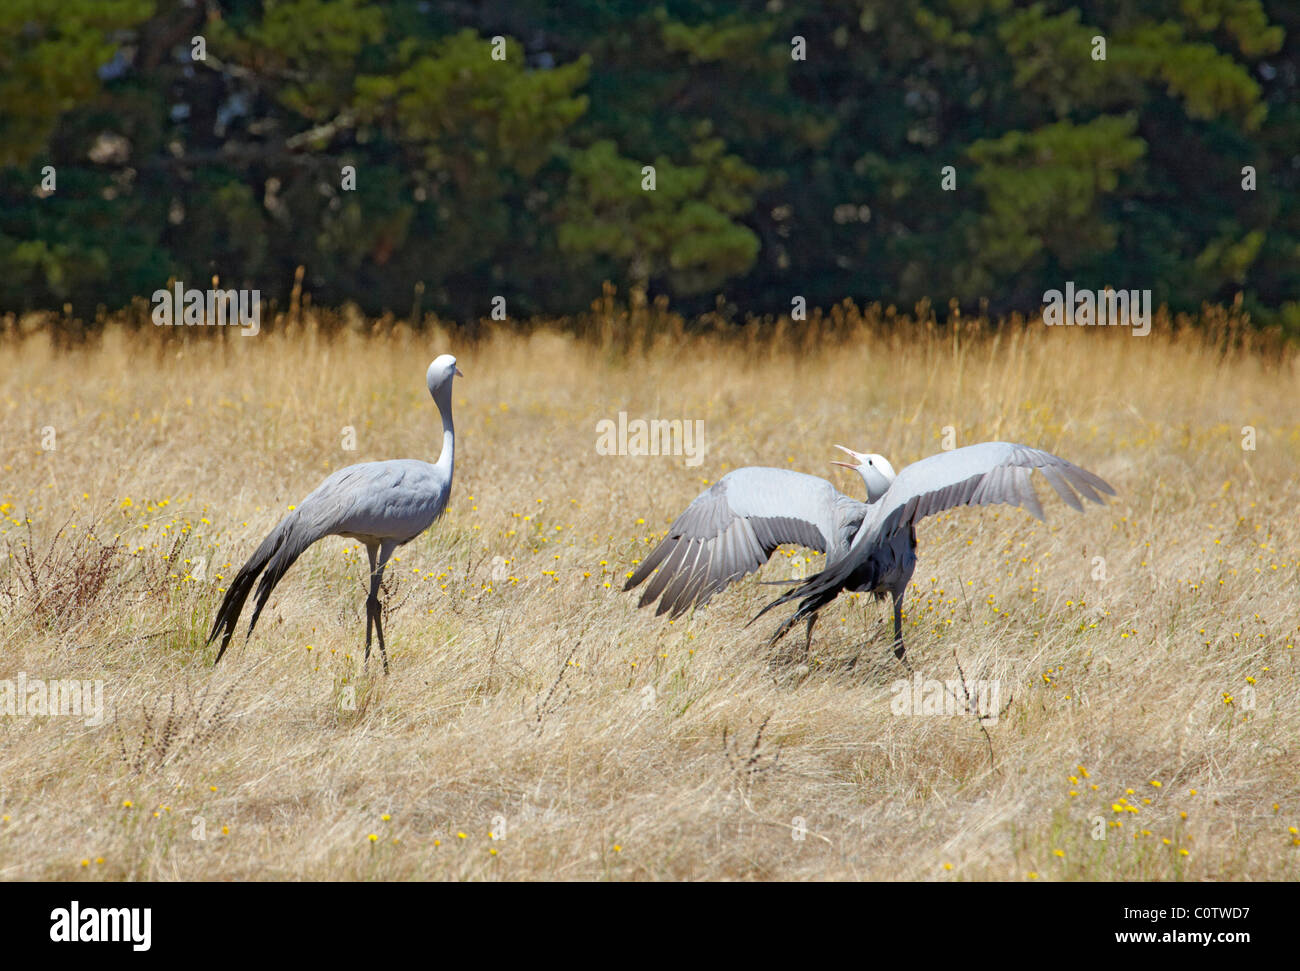 Blue Cranes - the national bird of South Africa. Oak Valley Estate, Elgin, Western Cape, South Africa. Stock Photo